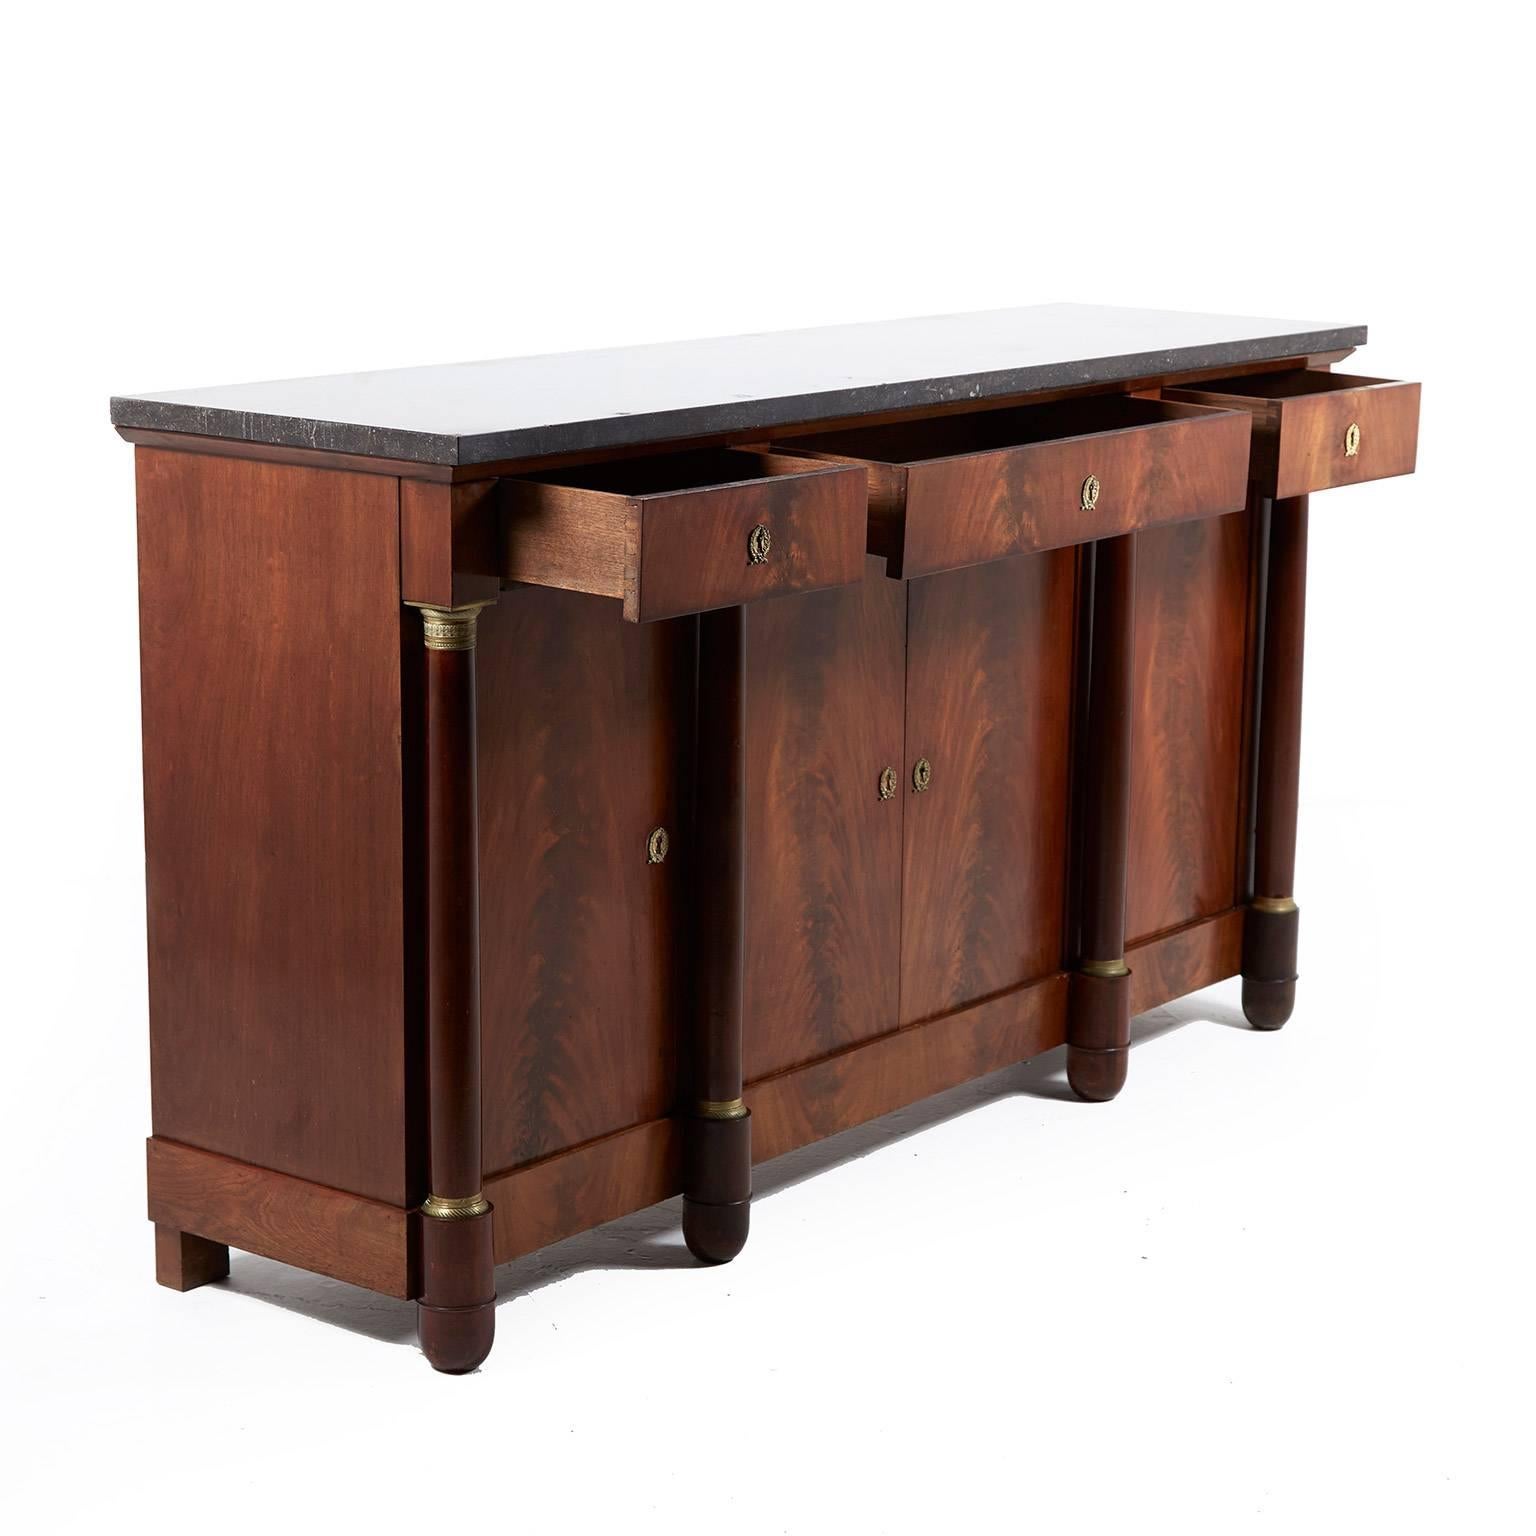 French Antique Empire Style Mahogany Sideboard with Columns and Marble Top, circa 1910